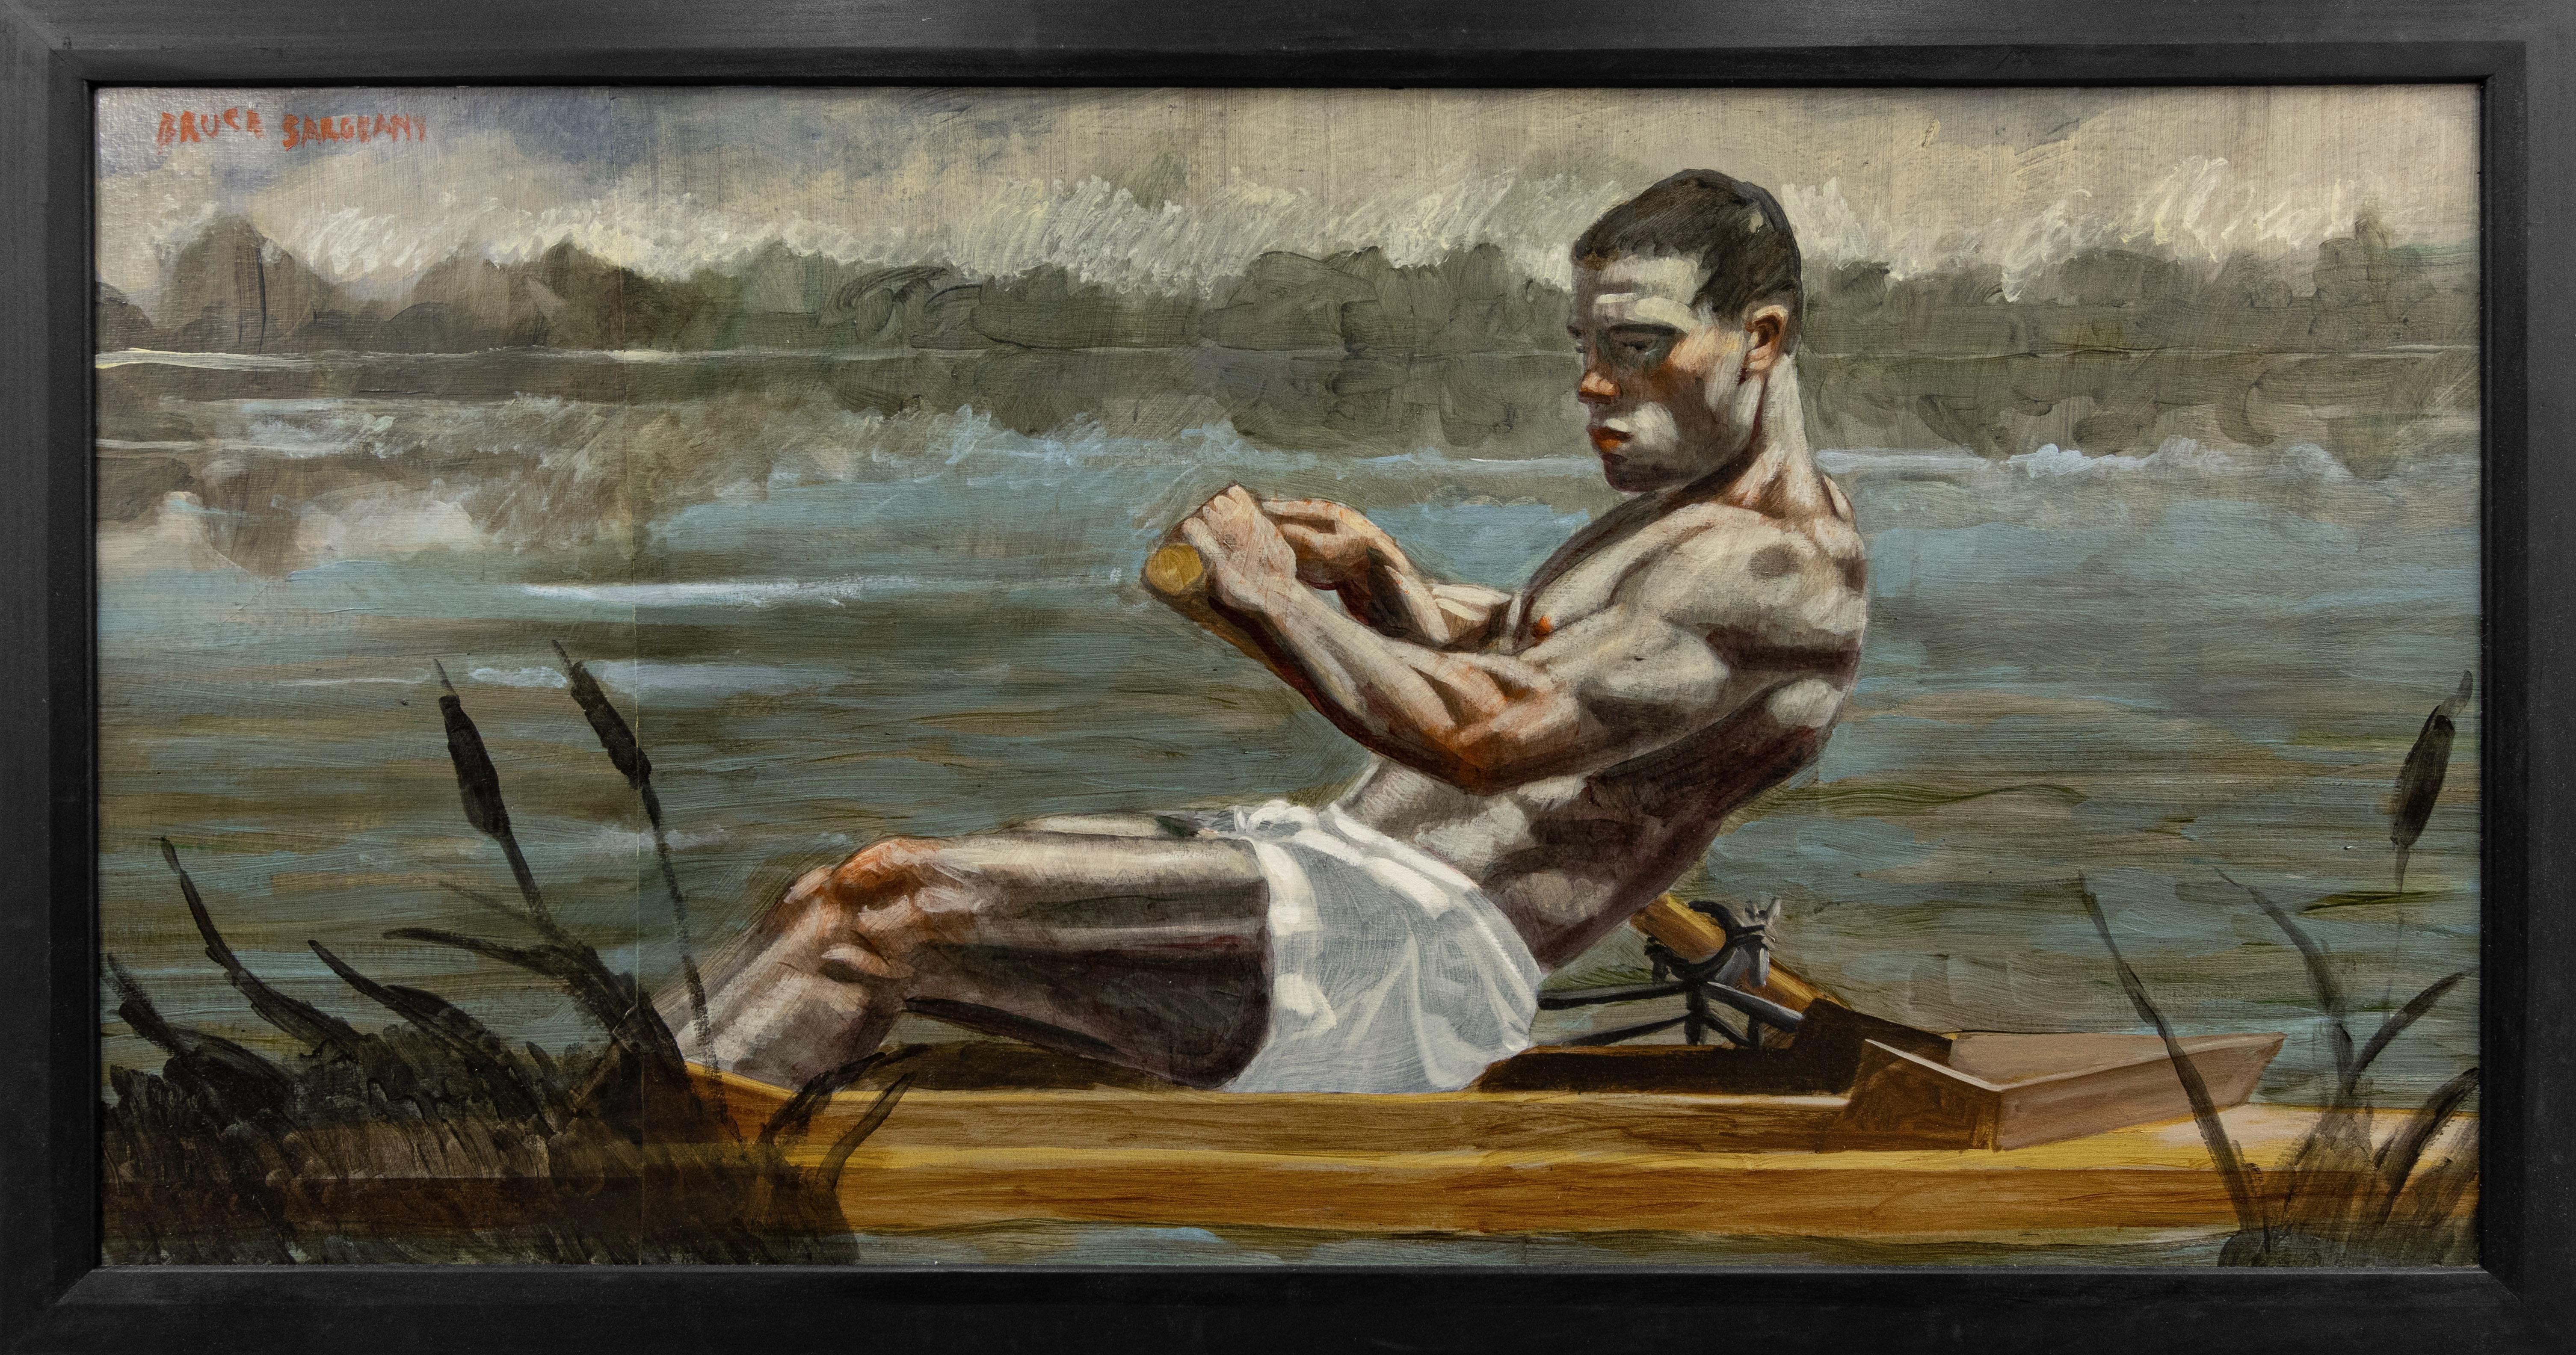 [Bruce Sargeant (1898-1938)] Single Rower in Cattails